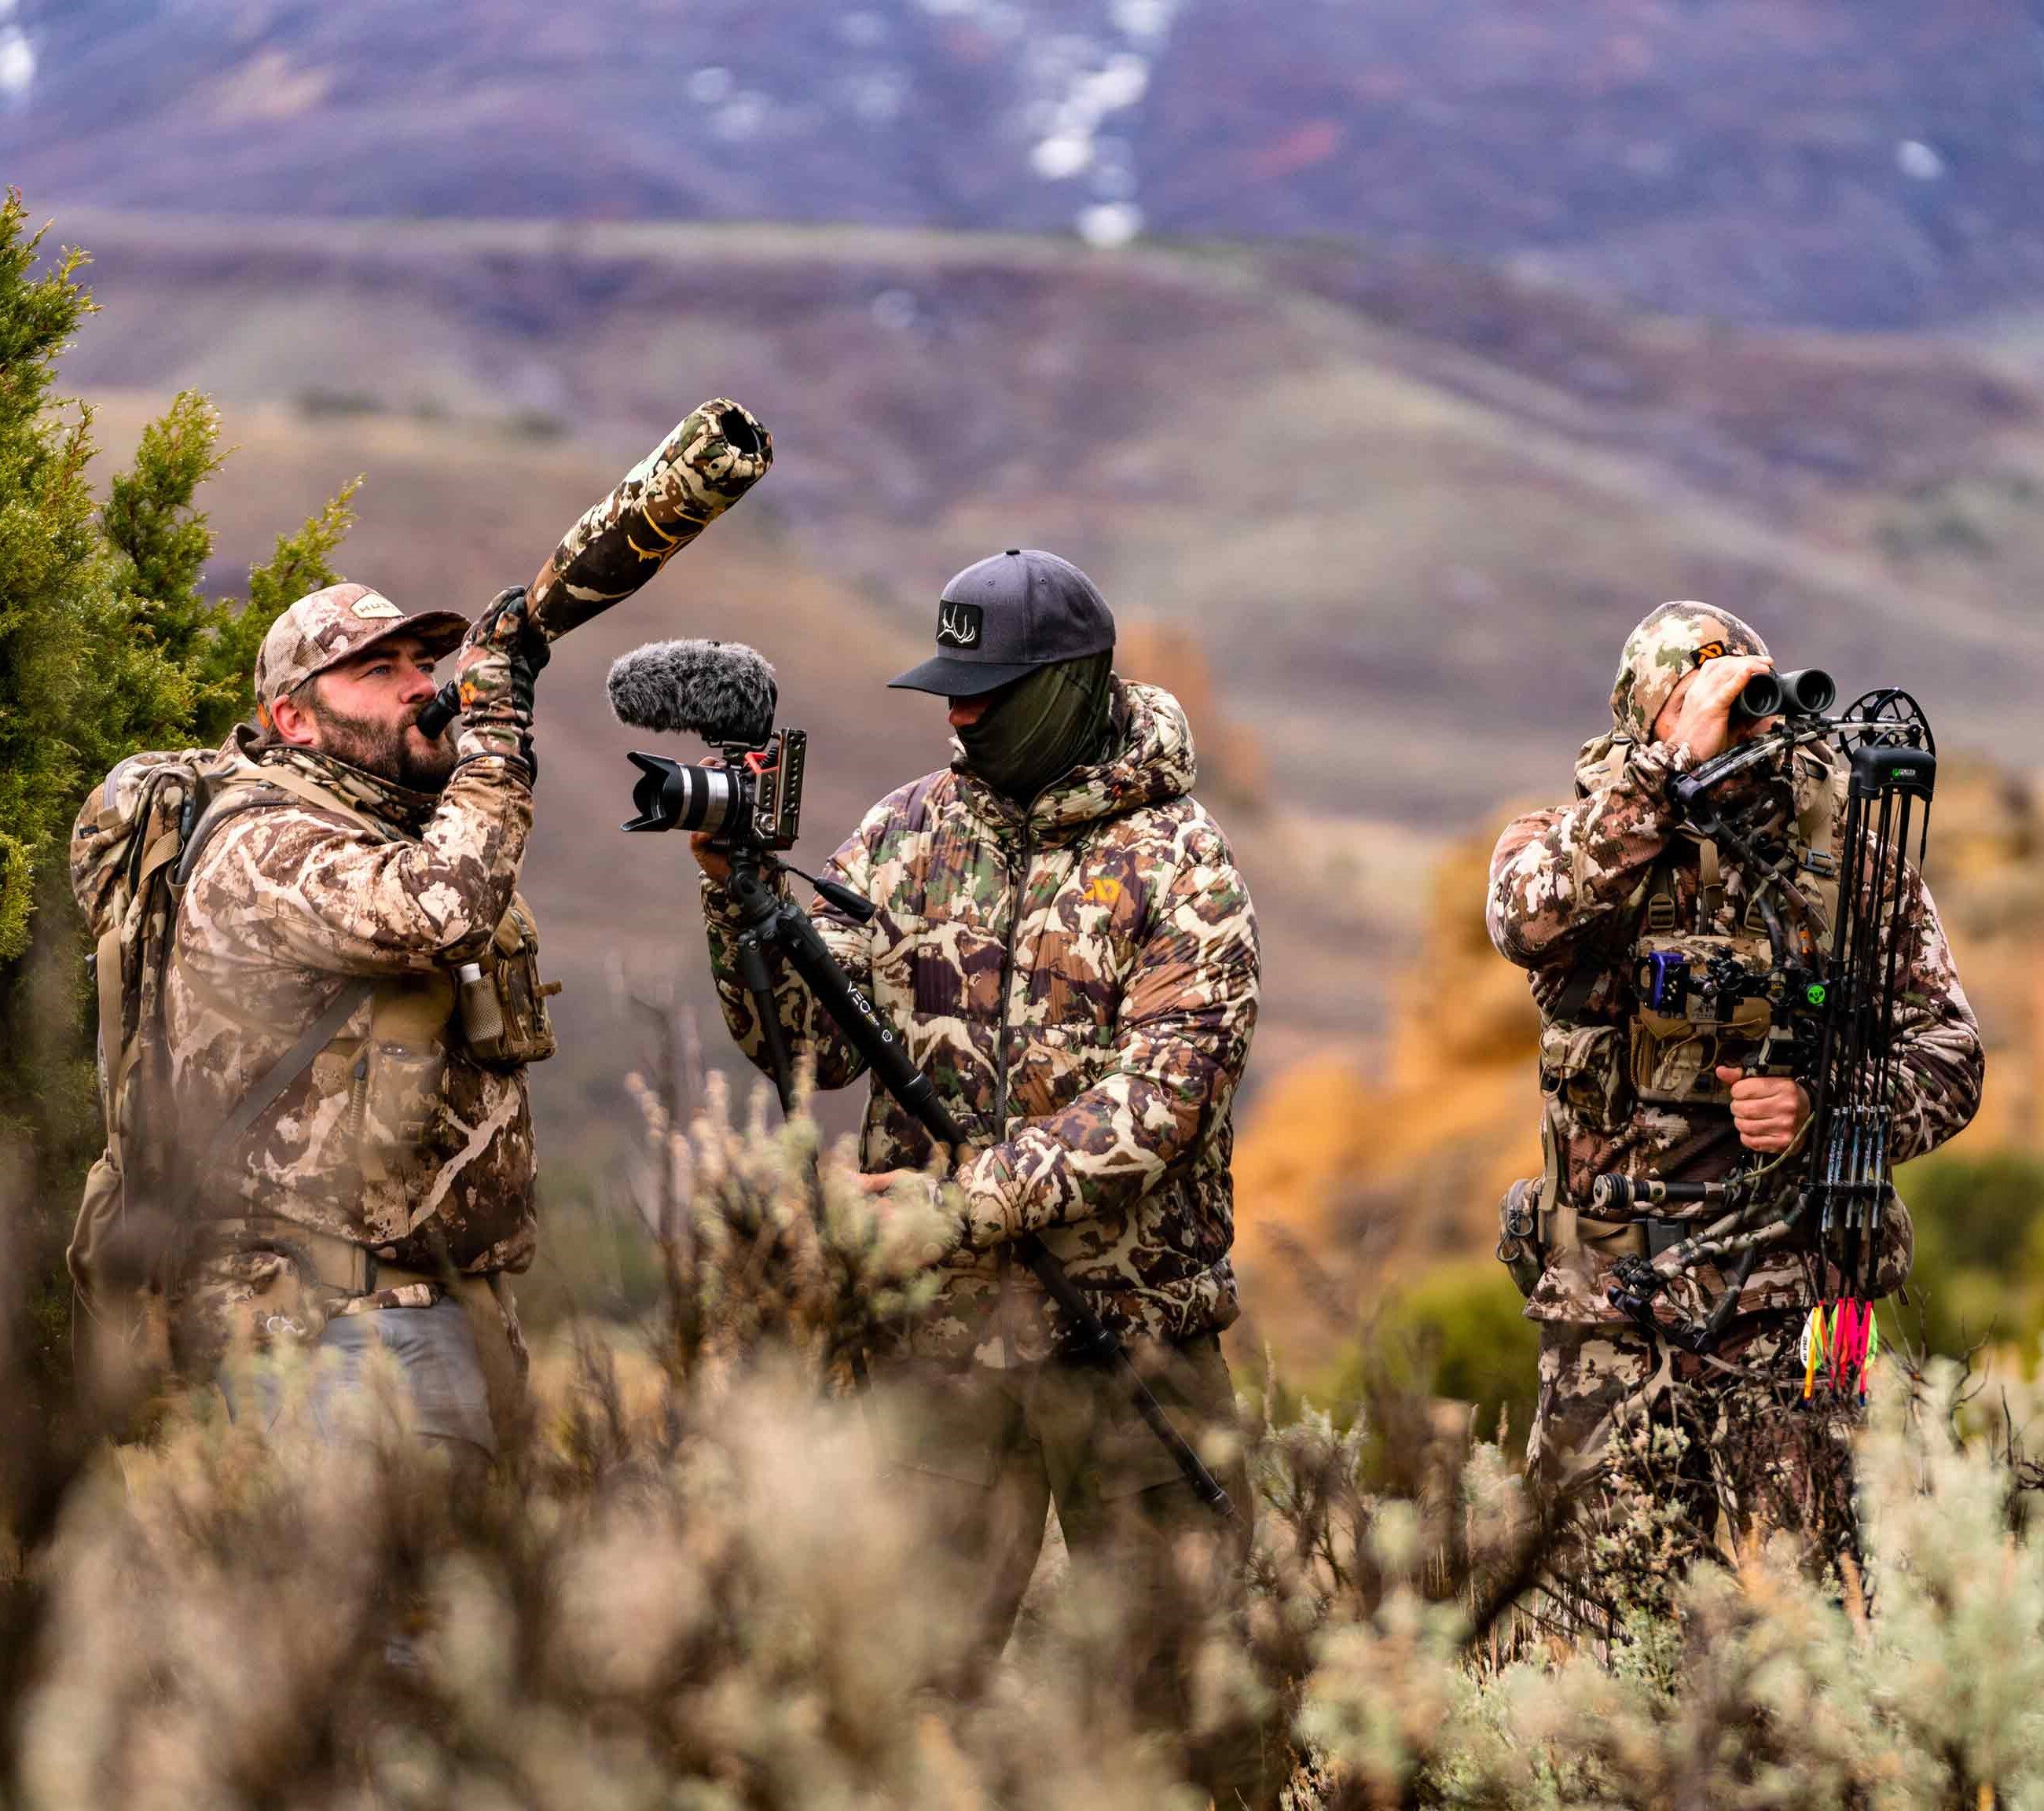 Three members of the Hushin' crew dressed in camo filming one of their members calling an animal. 